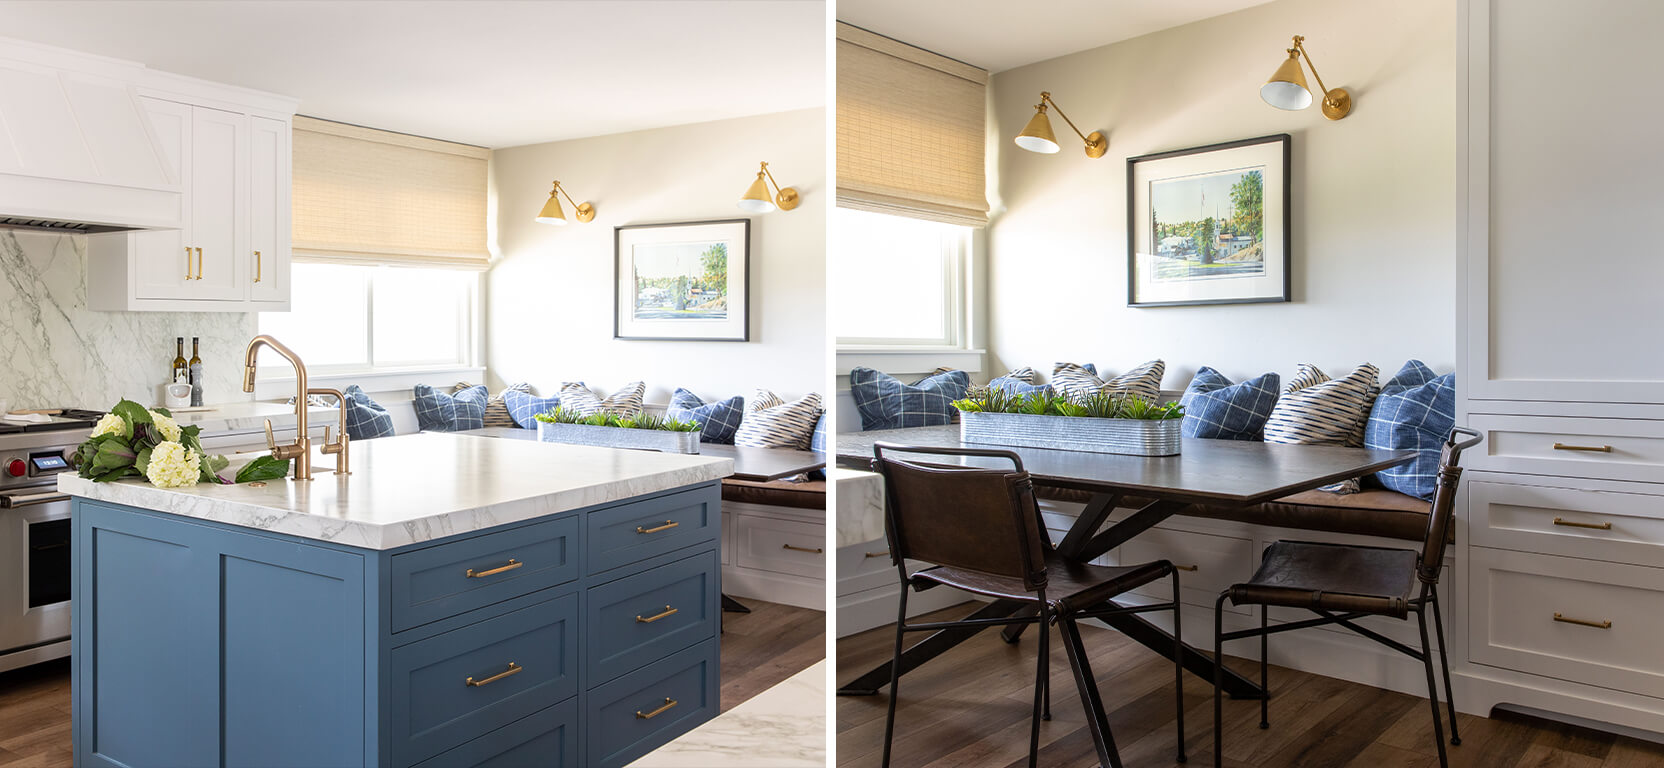 Left image: Kitchen with large center island and banquette dining area with white and blue decor, a marble-look backsplash, and gold hardware.  Right image: Close shot of banquette dining area with under-bench storage, throw pillows in various patterns, and removable chairs for wheelchair access.